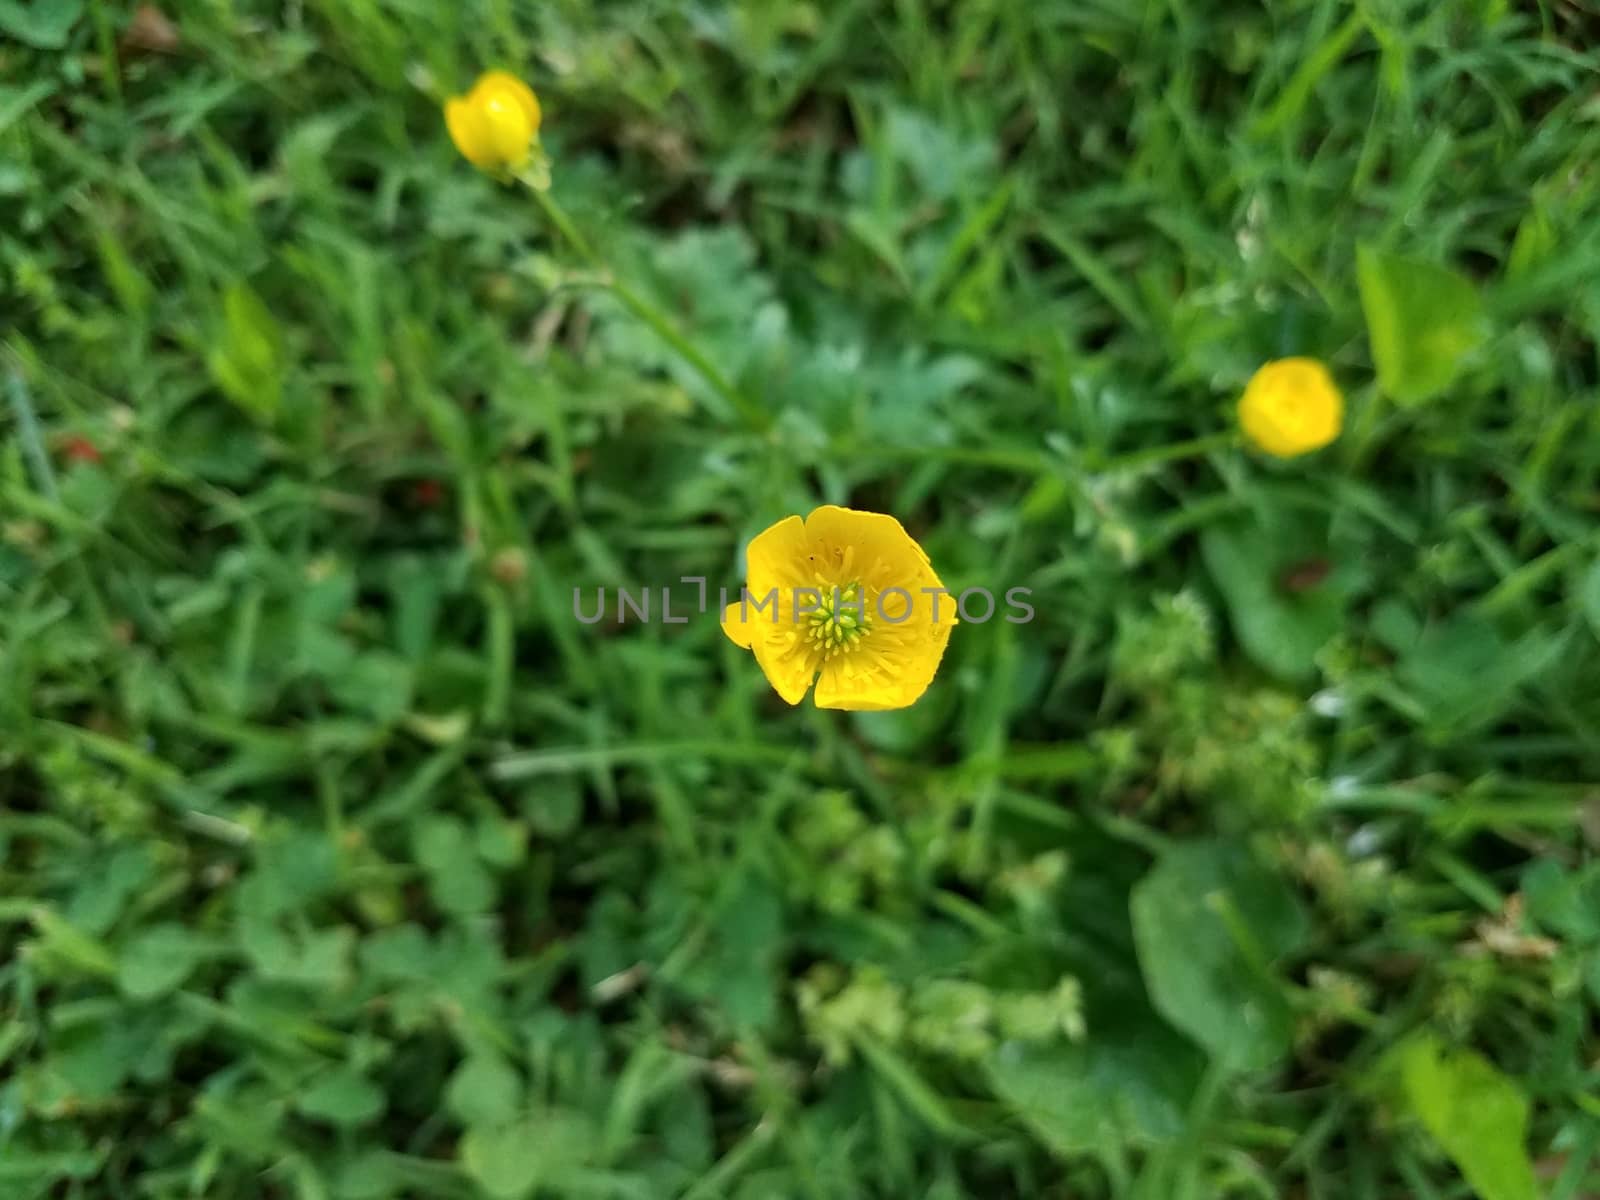 green plant or weed with yellow flower in grass or lawn or yard